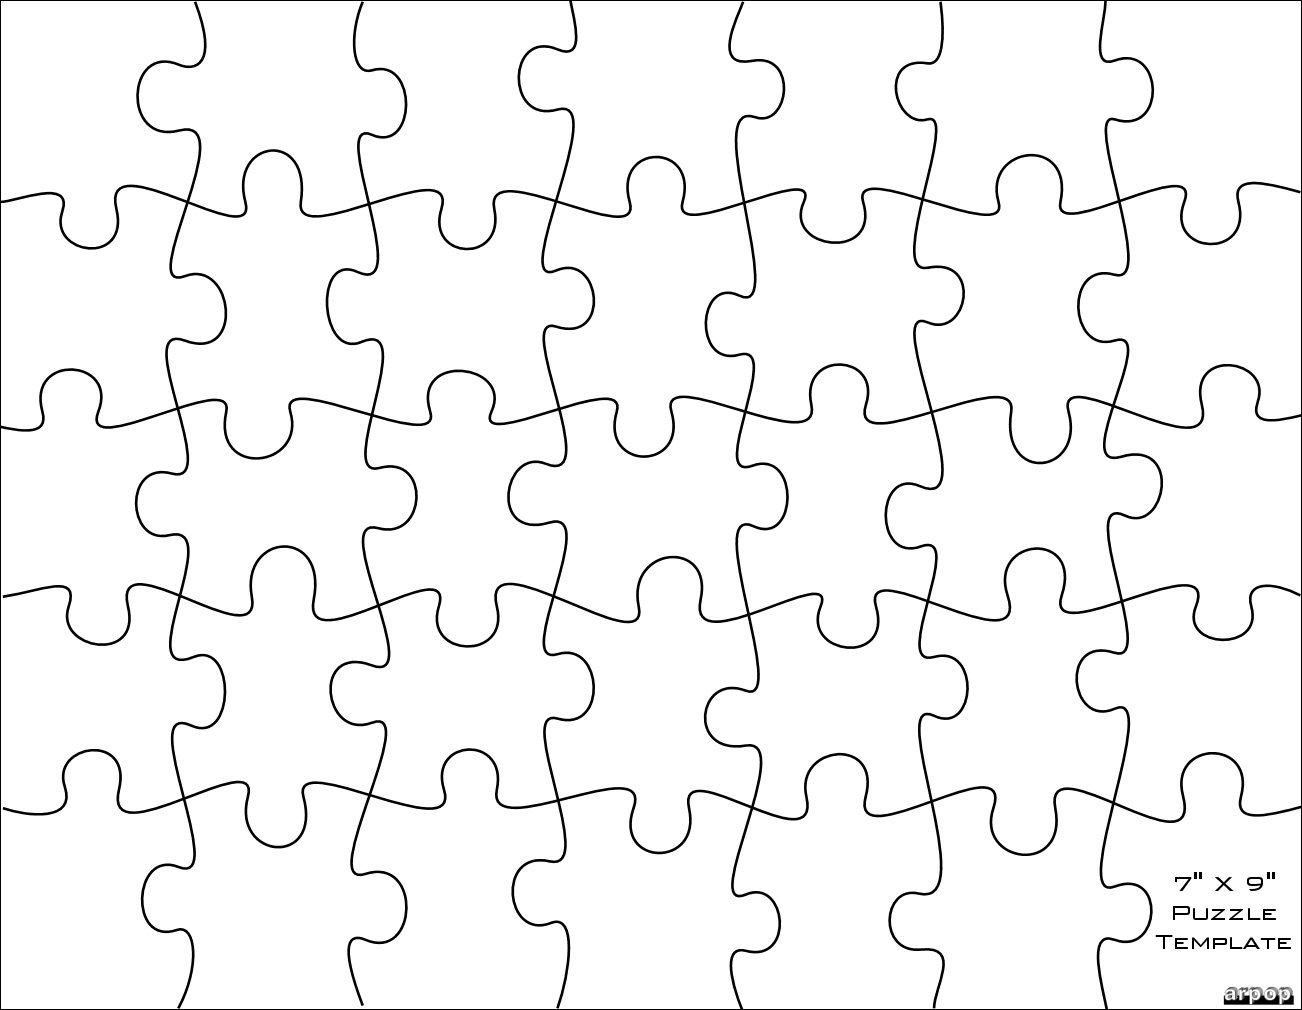 Free Puzzle Template, Download Free Clip Art, Free Clip Art On - Printable Jigsaw Puzzle Shapes